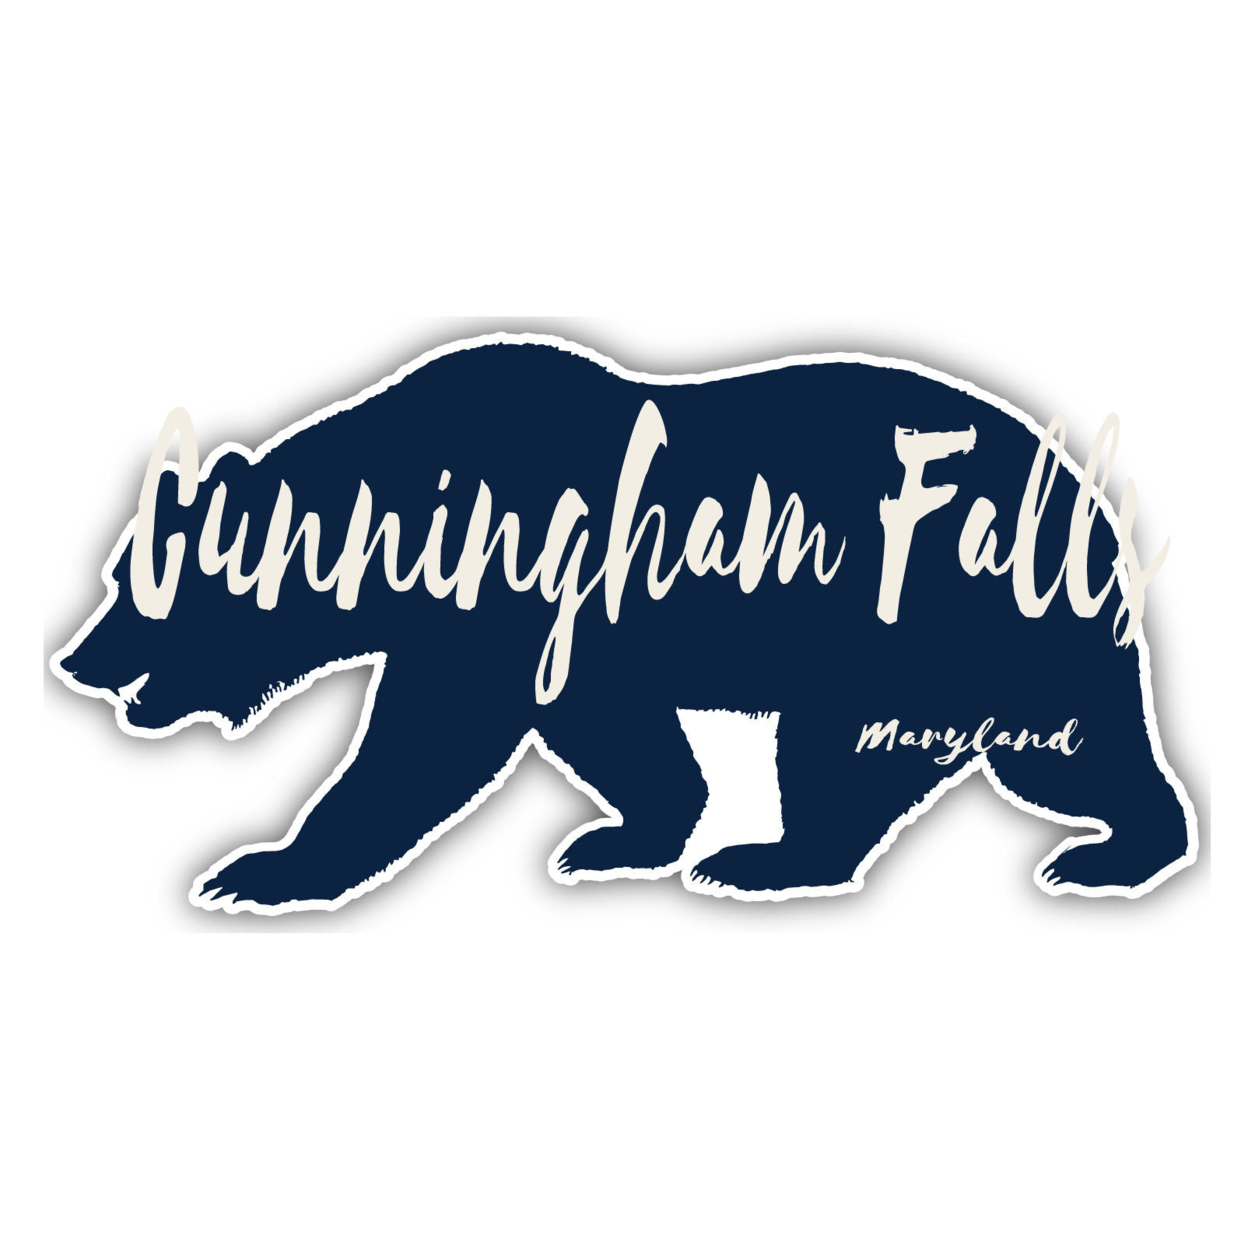 Cunningham Falls Maryland Souvenir Decorative Stickers (Choose Theme And Size) - Single Unit, 8-Inch, Bear